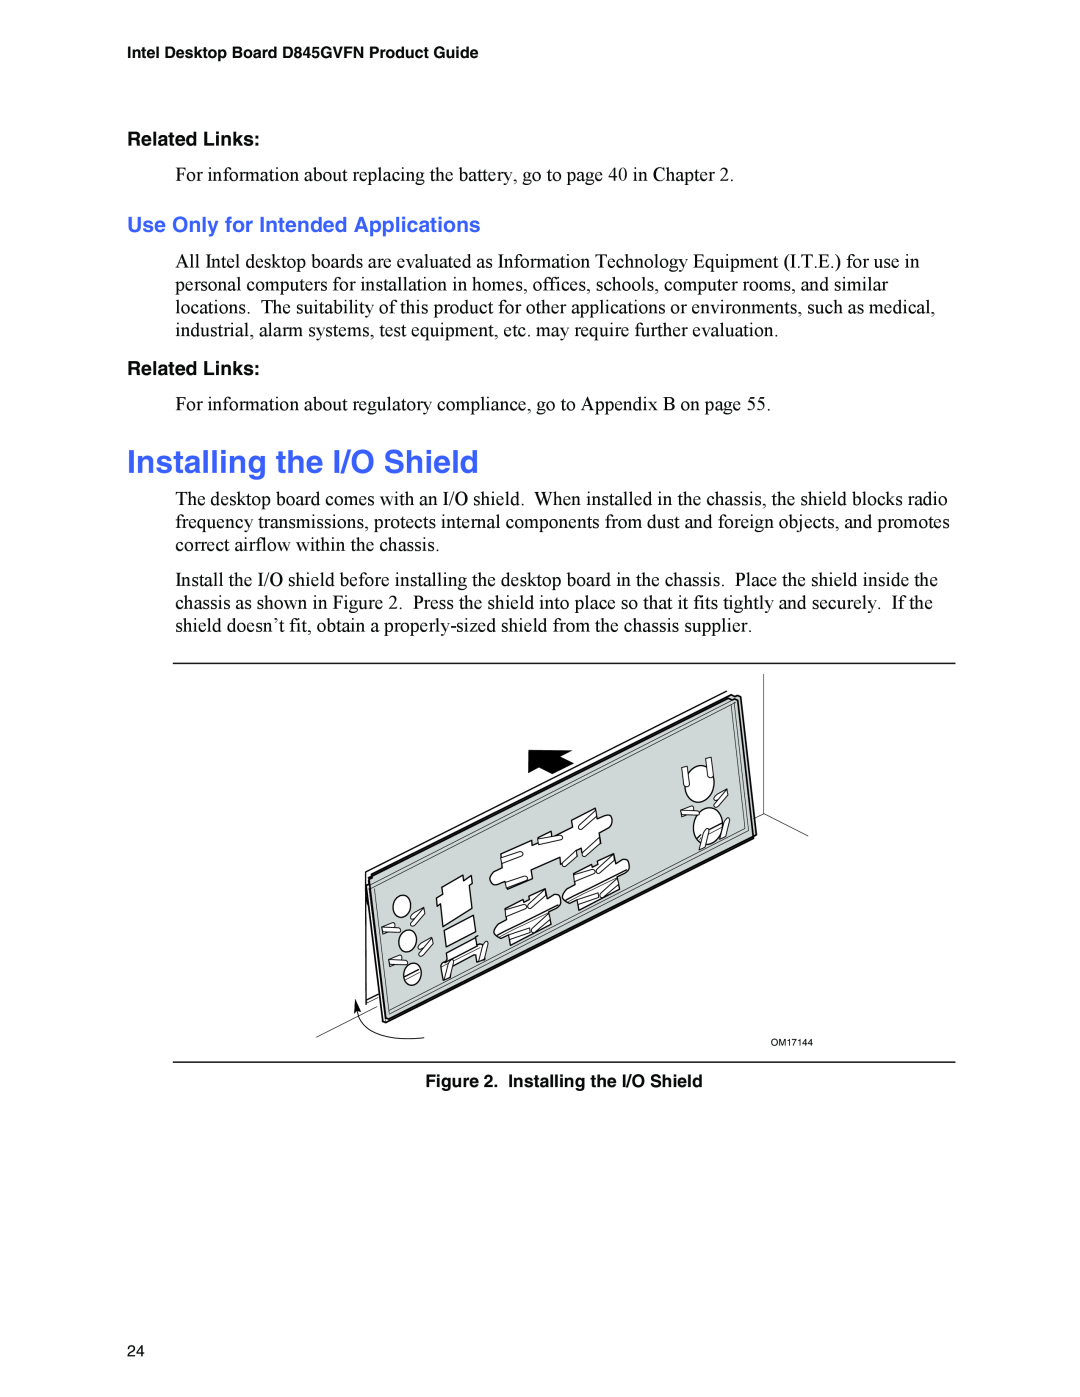 Intel D845GVFN manual Installing the I/O Shield, Use Only for Intended Applications, Related Links 